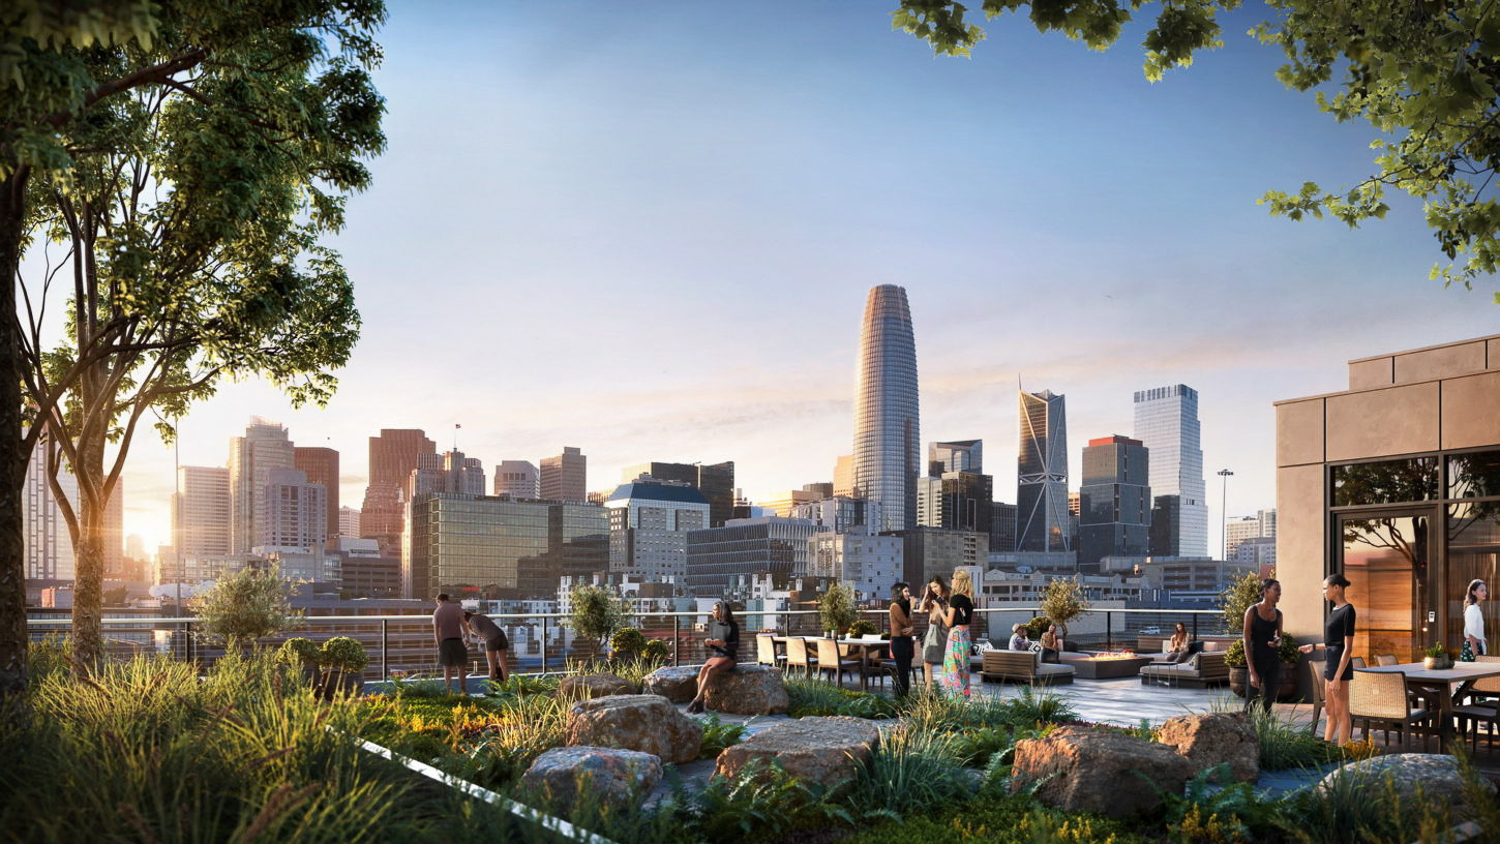 531 Bryant Street roof deck view of the San Francisco skyline, design by Handel Architects rendering by NQS Creative